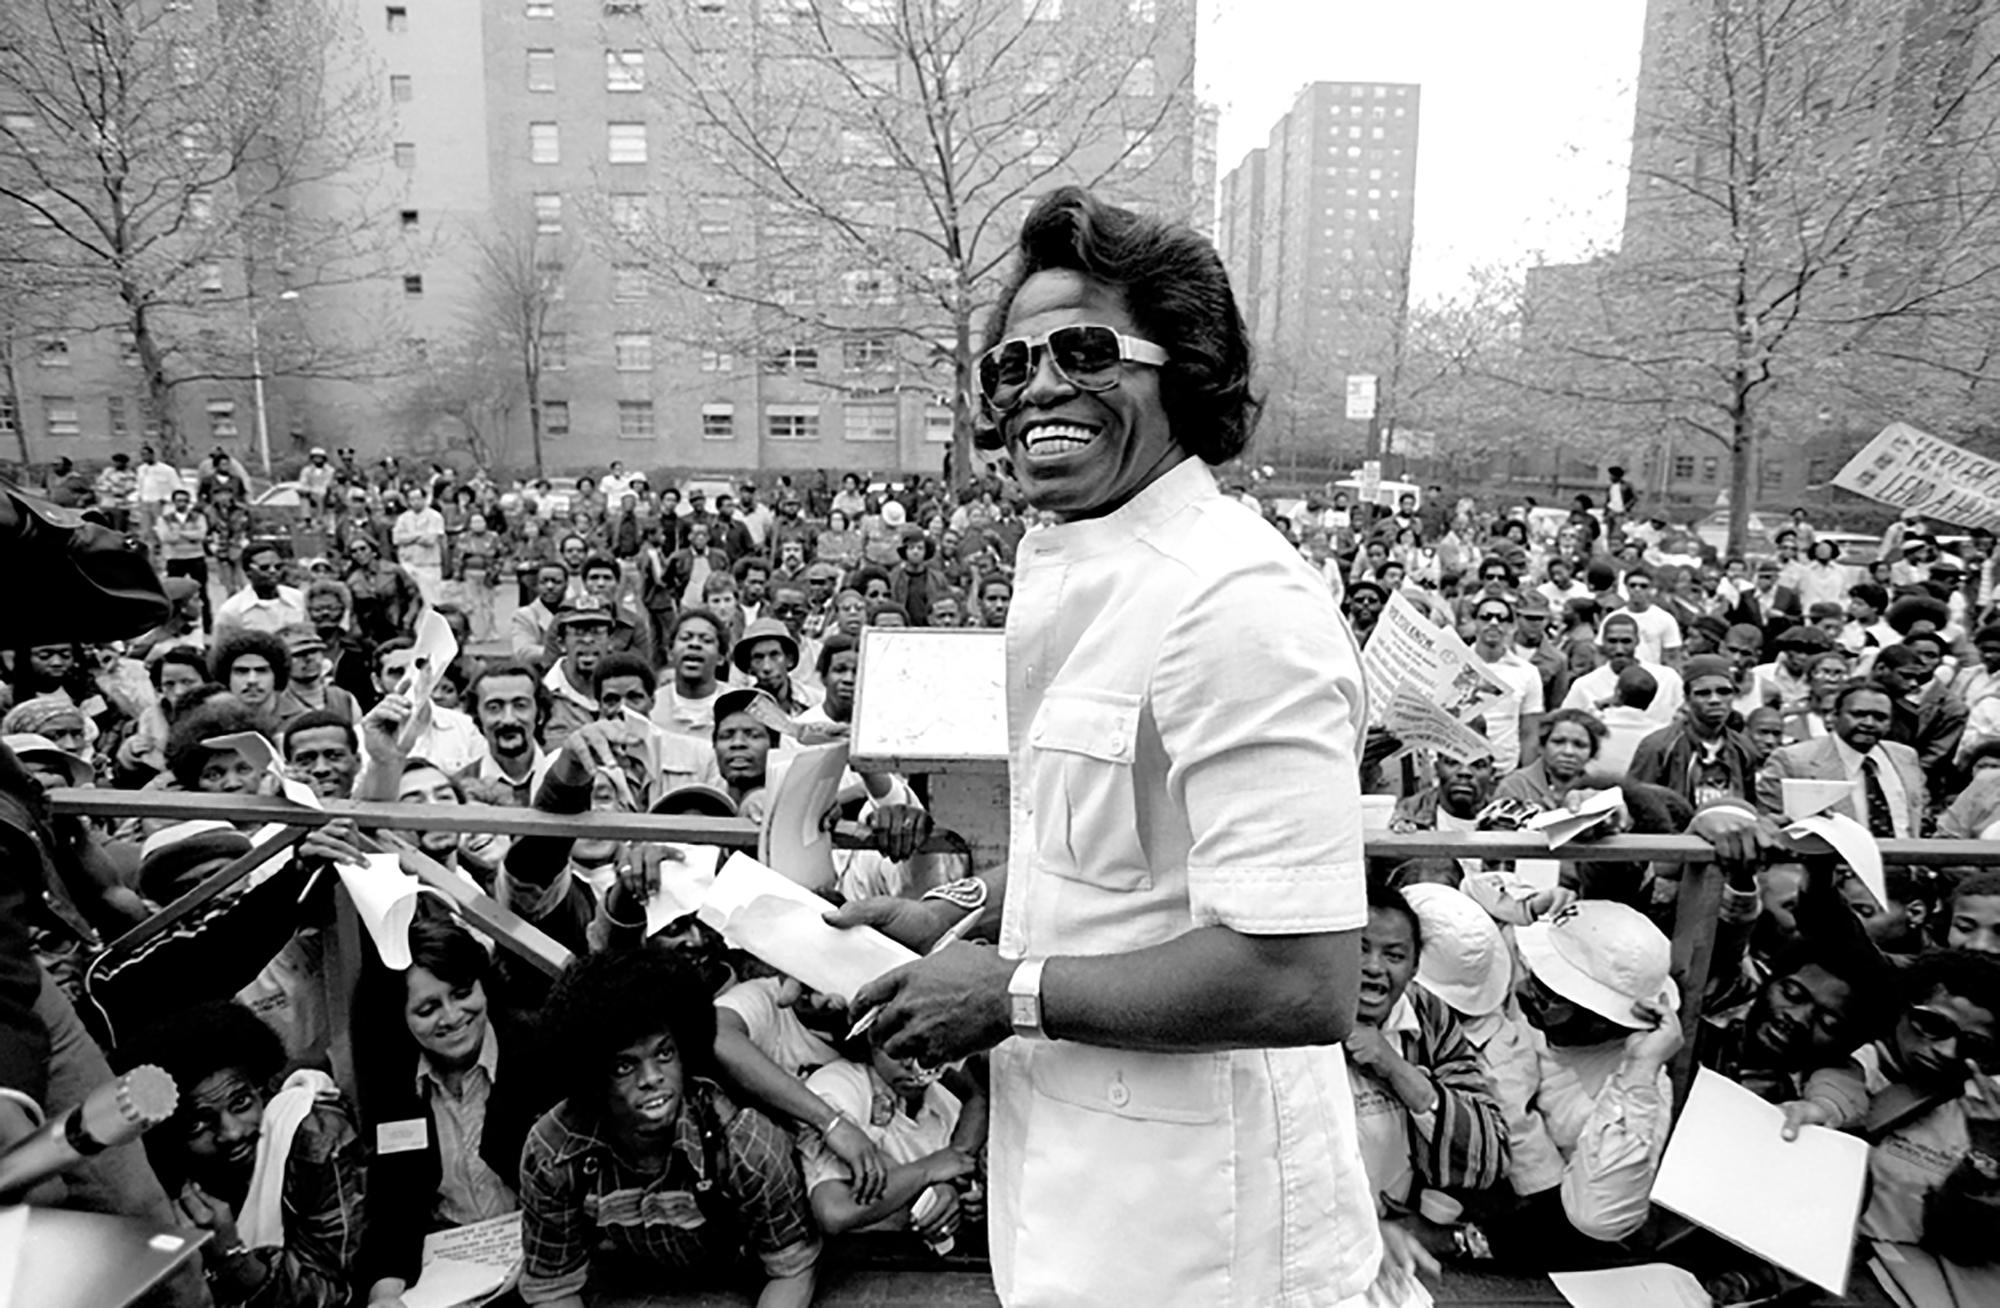 Richard E. Aaron Black and White Photograph - James Brown in Harlem Smiling in Hi Resolution on Hahnemuehle Paper